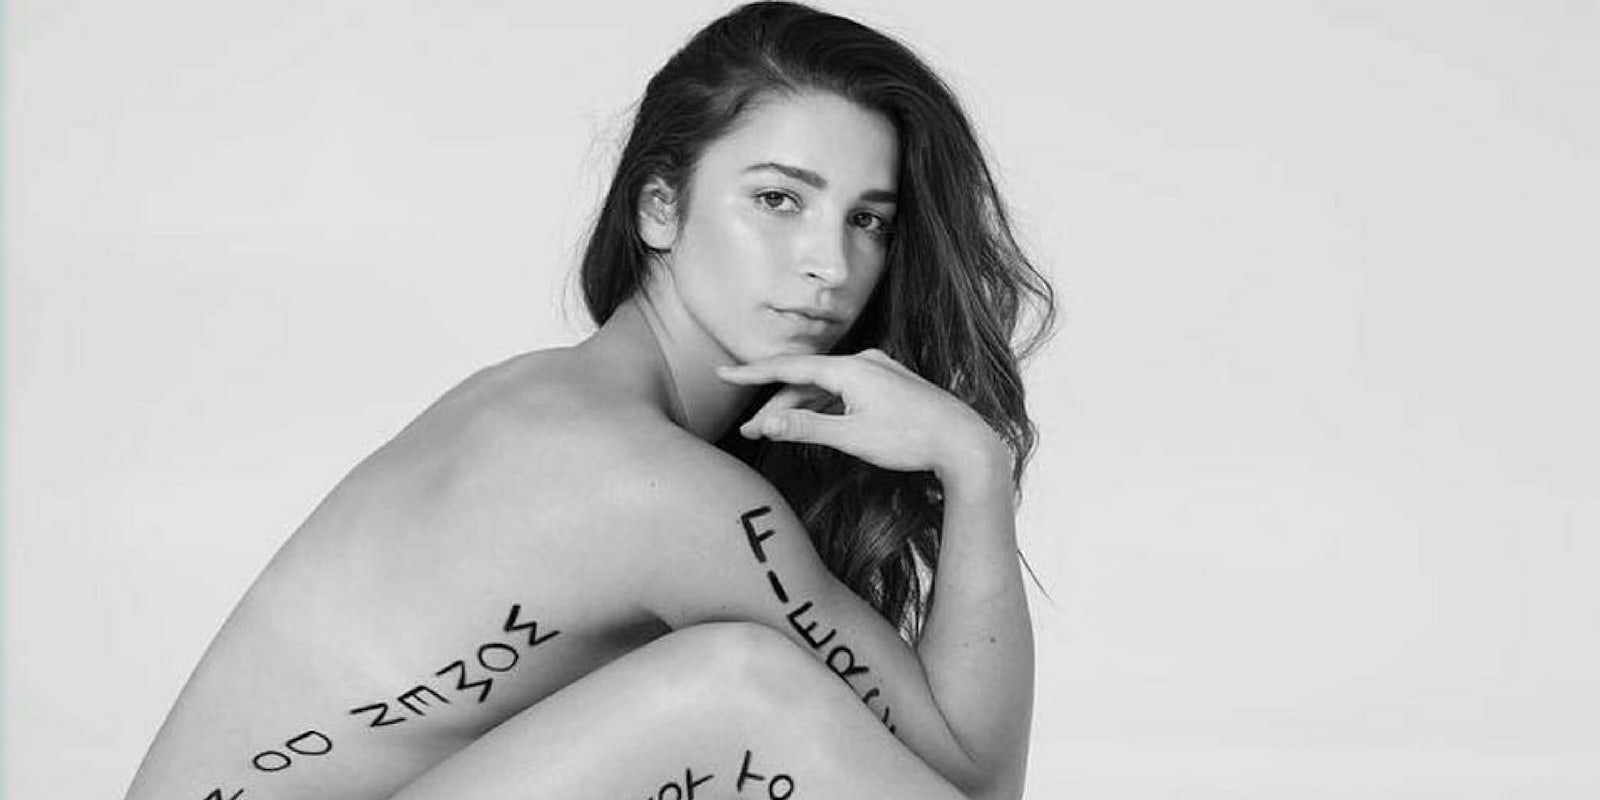 Aly Raisman shares a photo of herself with writing on her body as part of the 'Me Too' project in the 'Sports Illustrated' swimsuit edition.